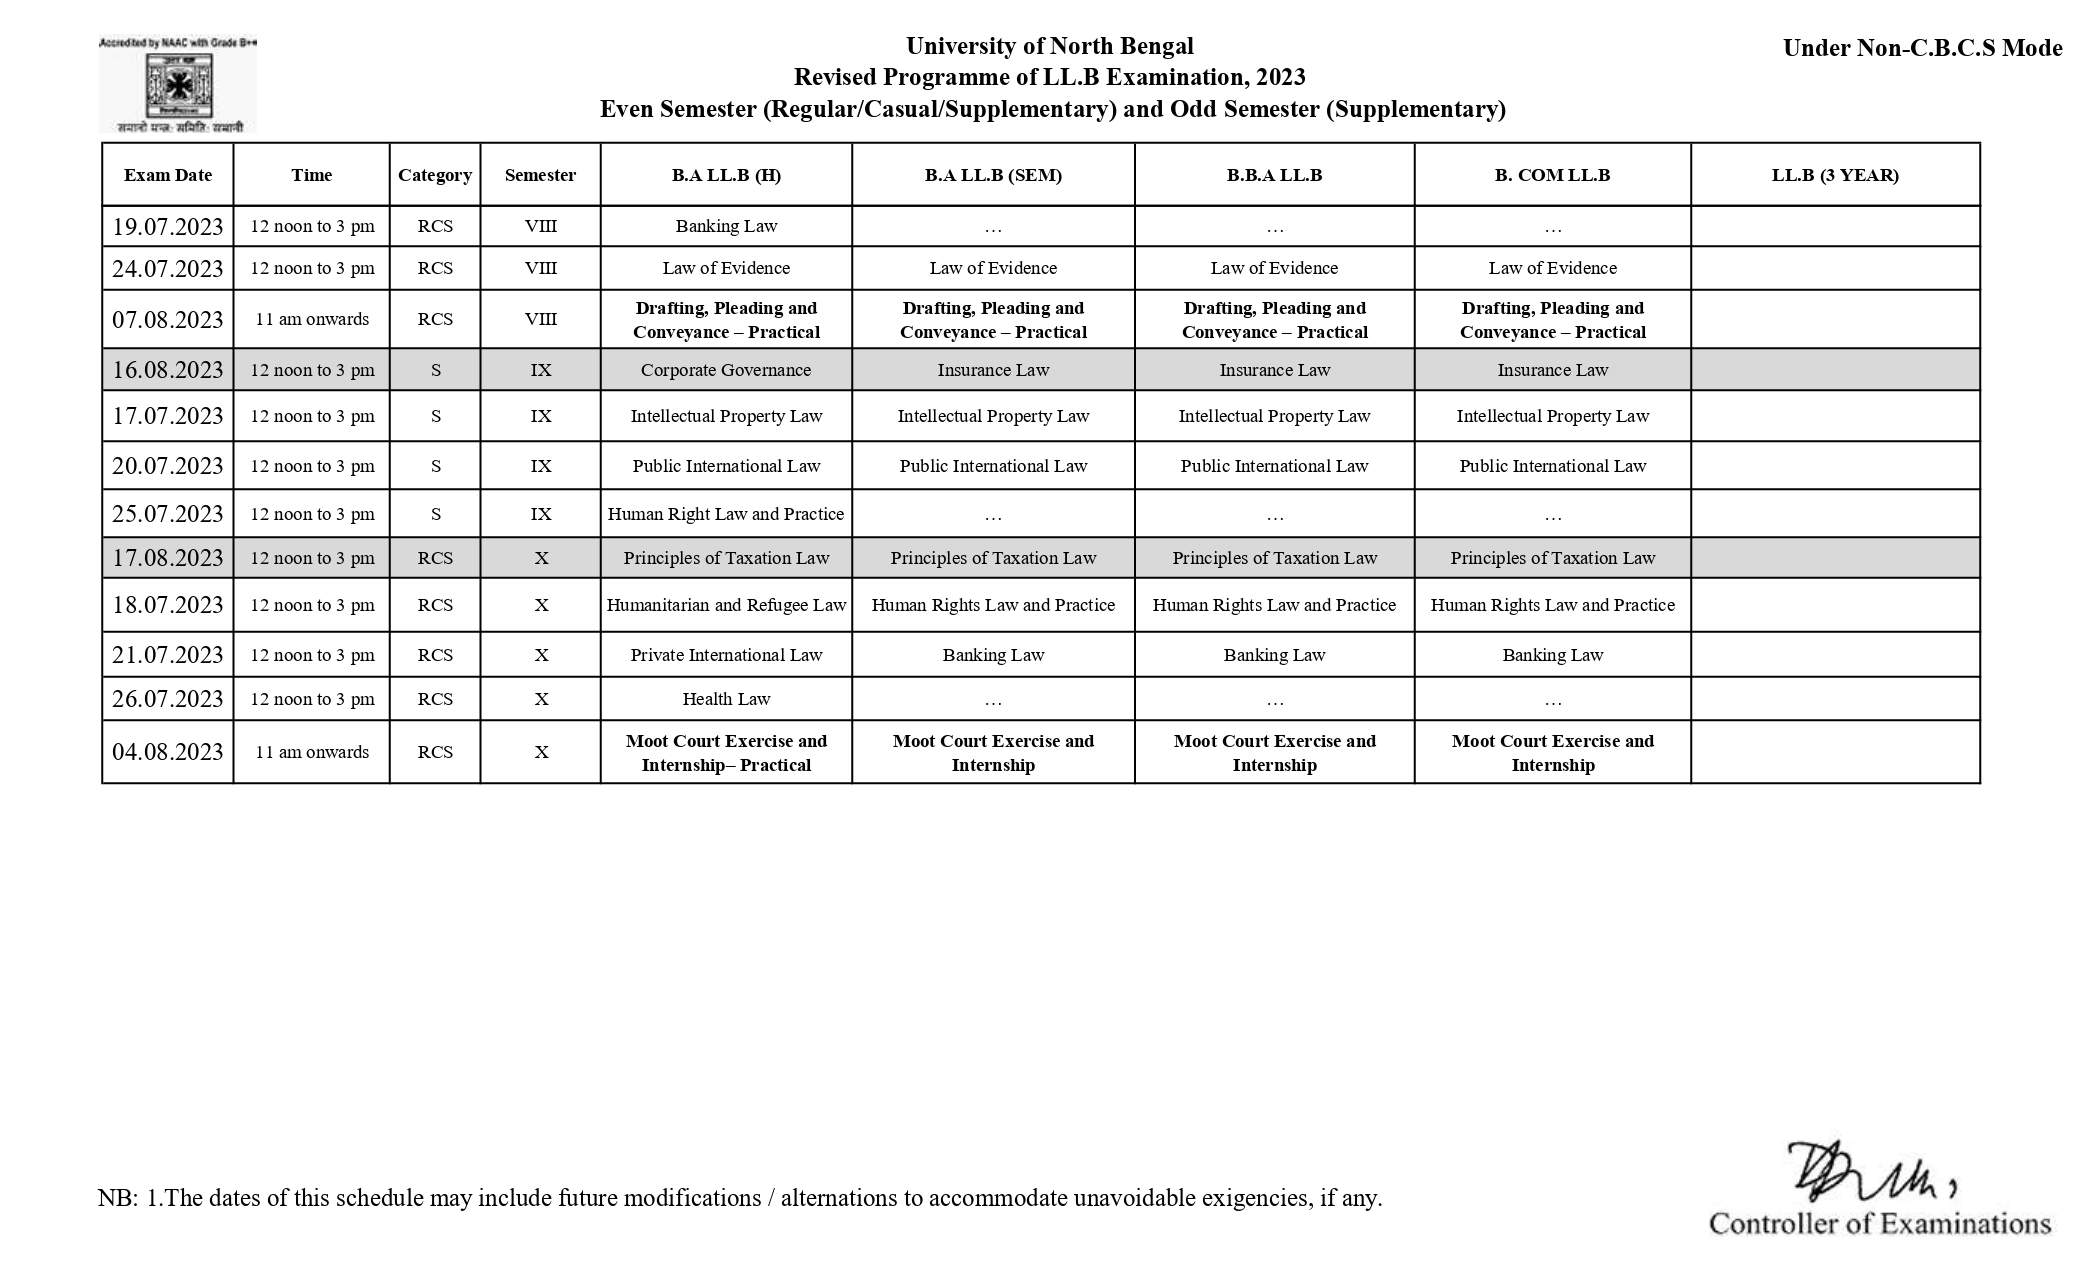 Revised Examination Schedule July 2023 (Non-CBCS) Page 2